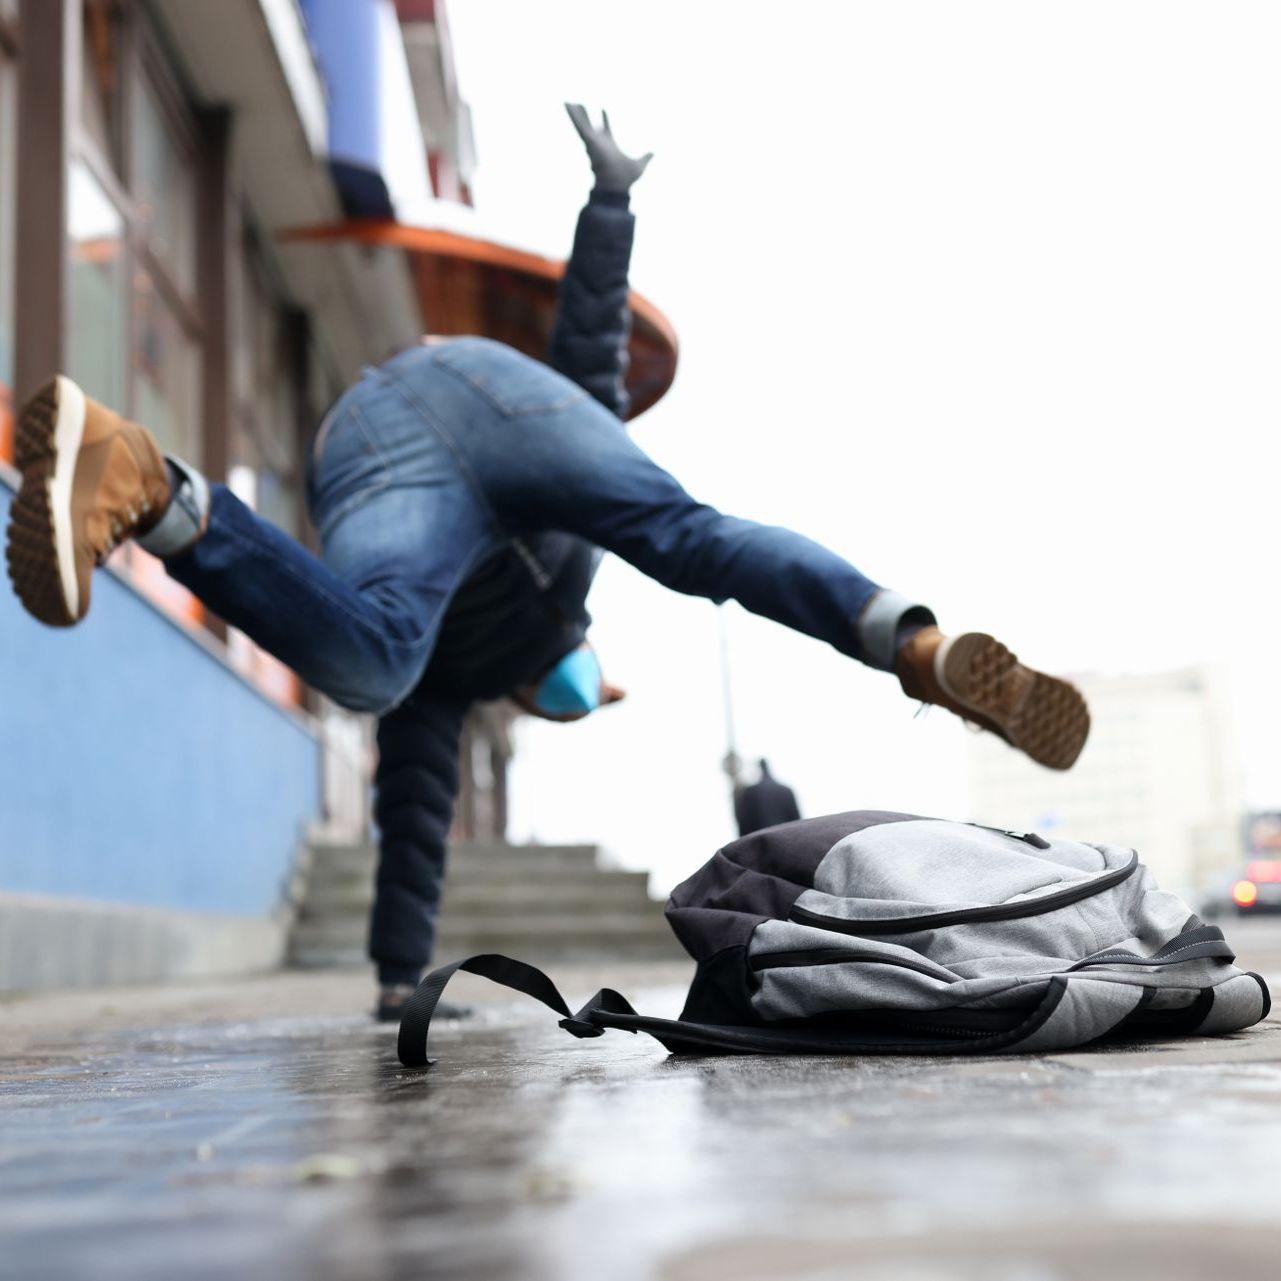 Slip & fall accidents